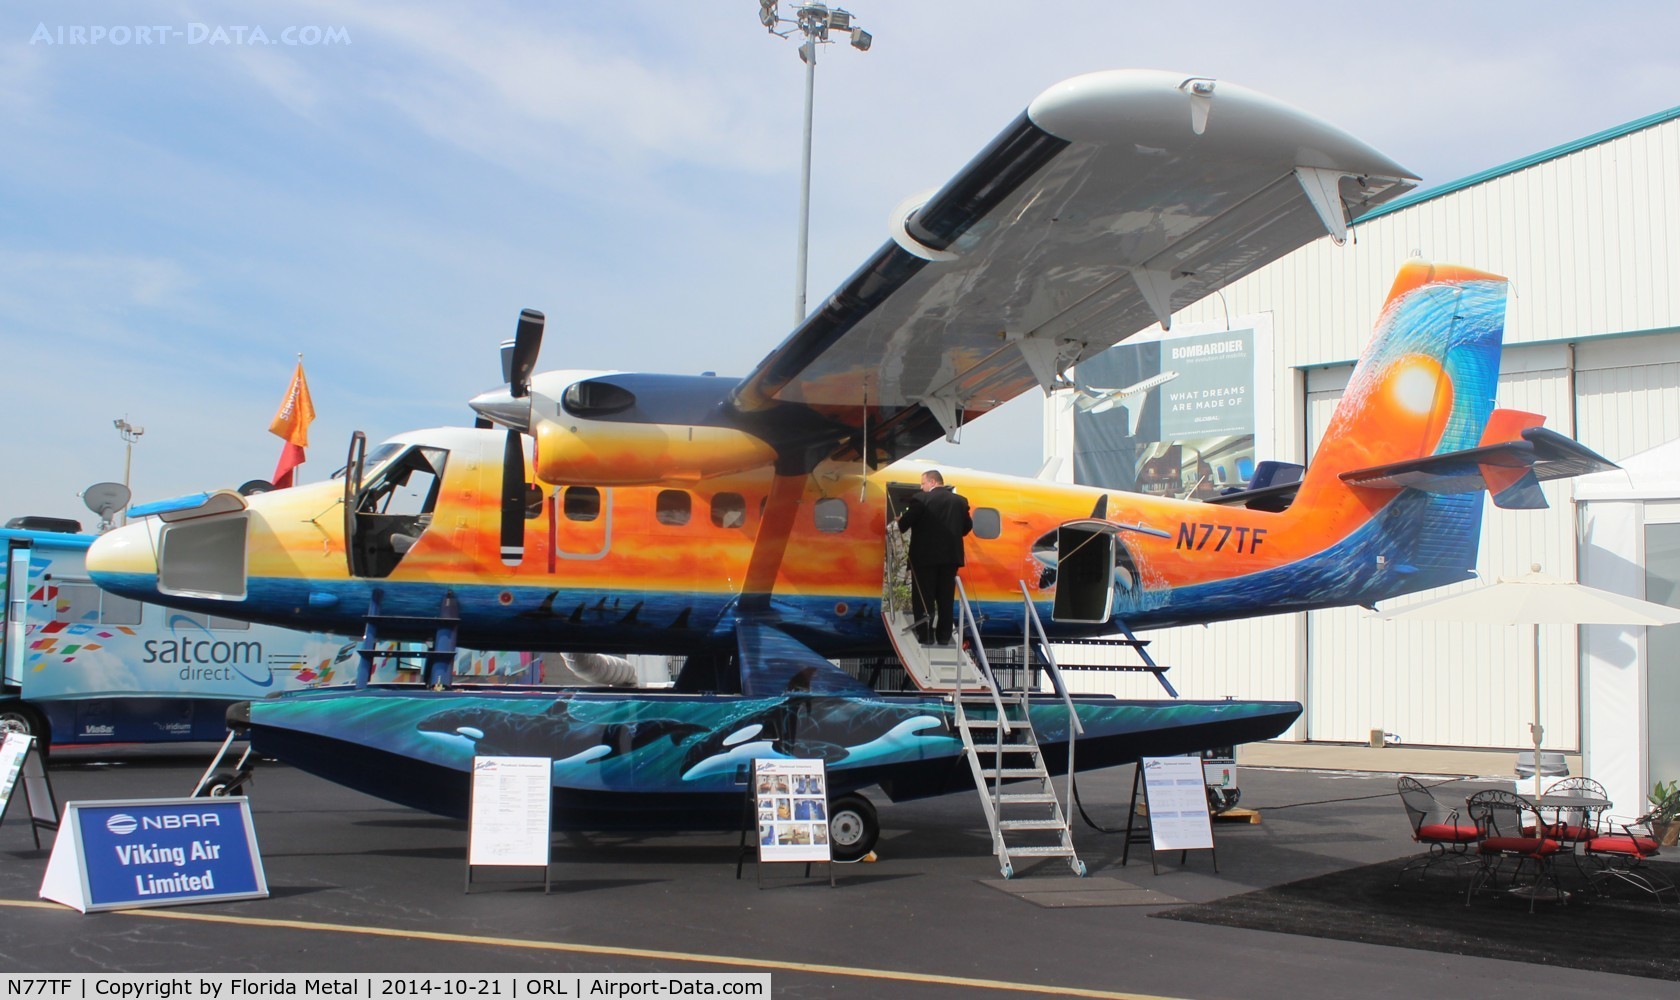 N77TF, 2013 Viking DHC-6-400 Twin Otter C/N 870, Viking Twin Otter with cool paint